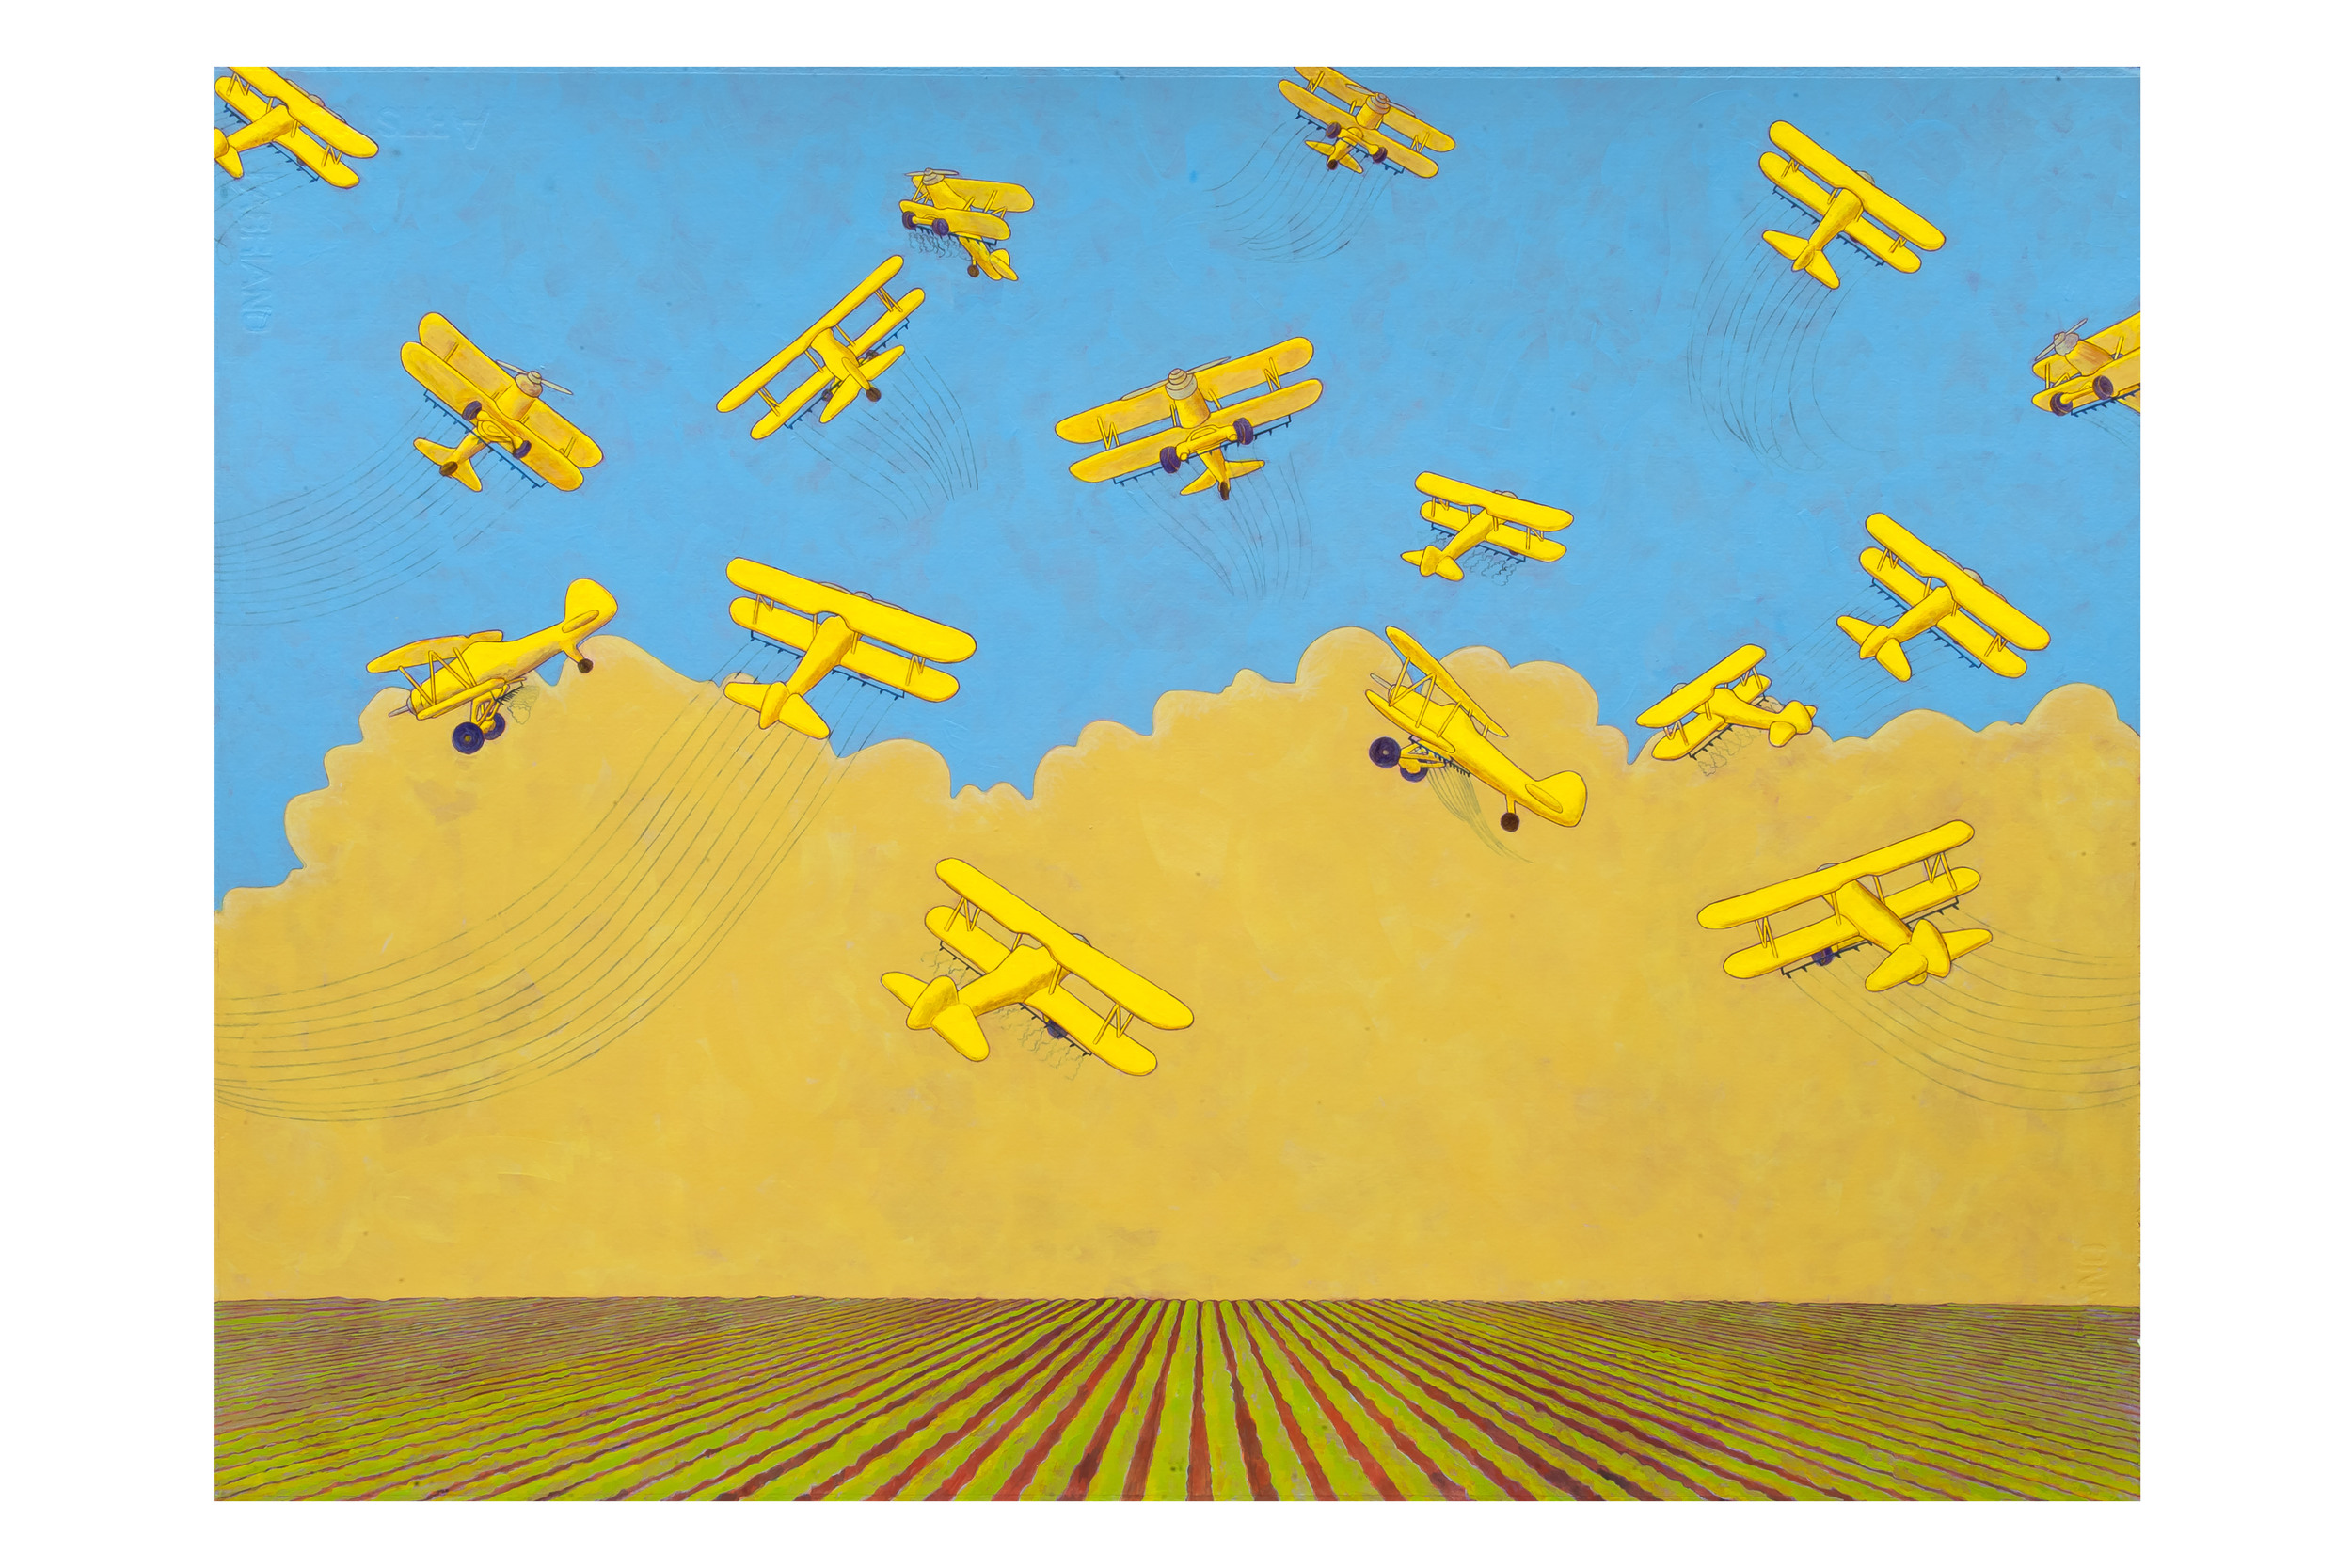   Crop Dusters,  2012 Acrylic on paper, 22” x 30” 